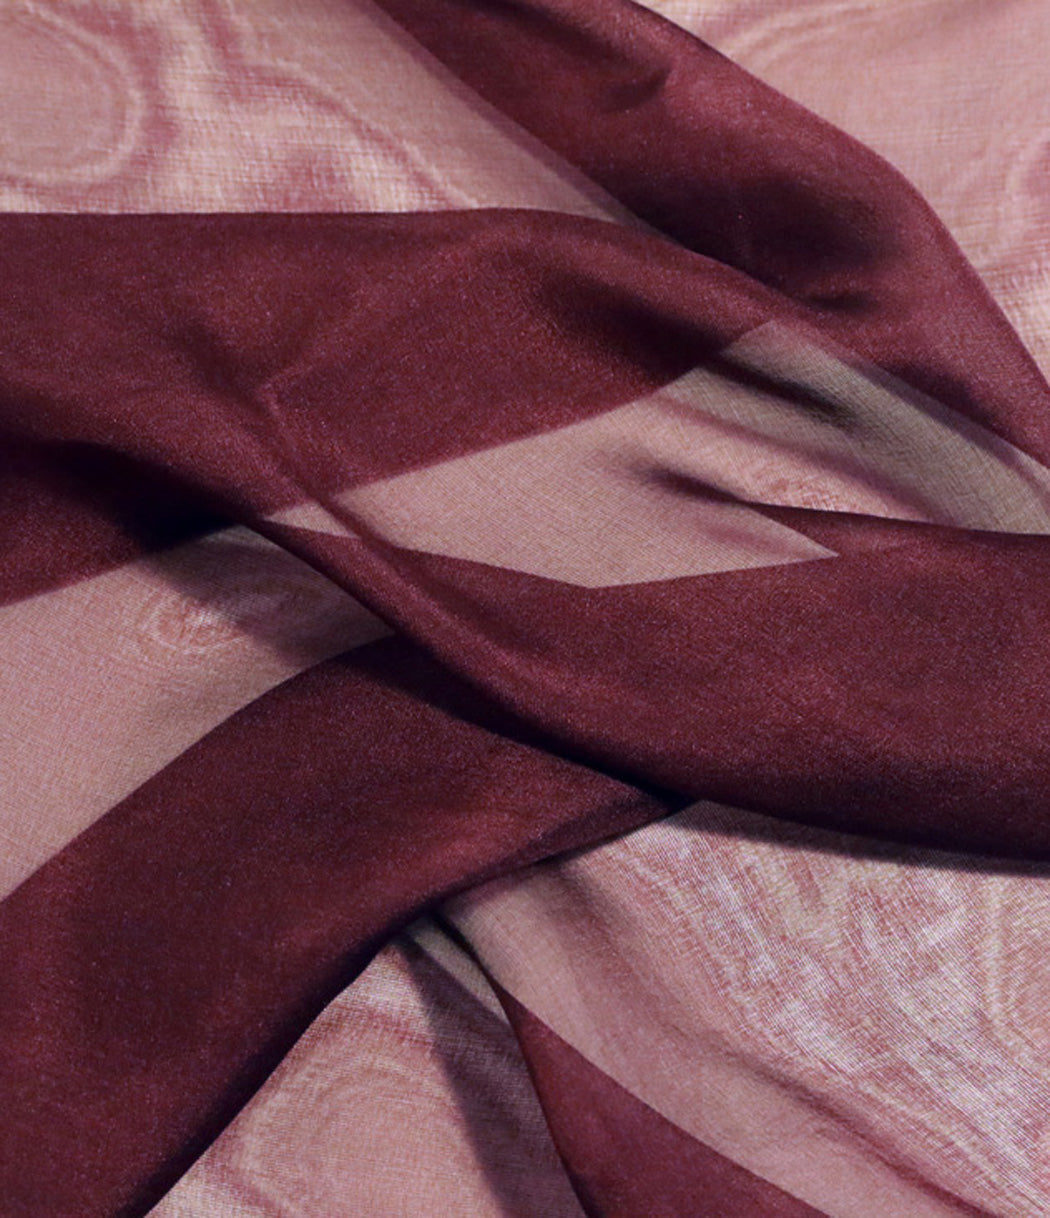 < Limited Edition > Silk Chiffon Scarf in bordeaux / 53 x 53cm / Made in Japan